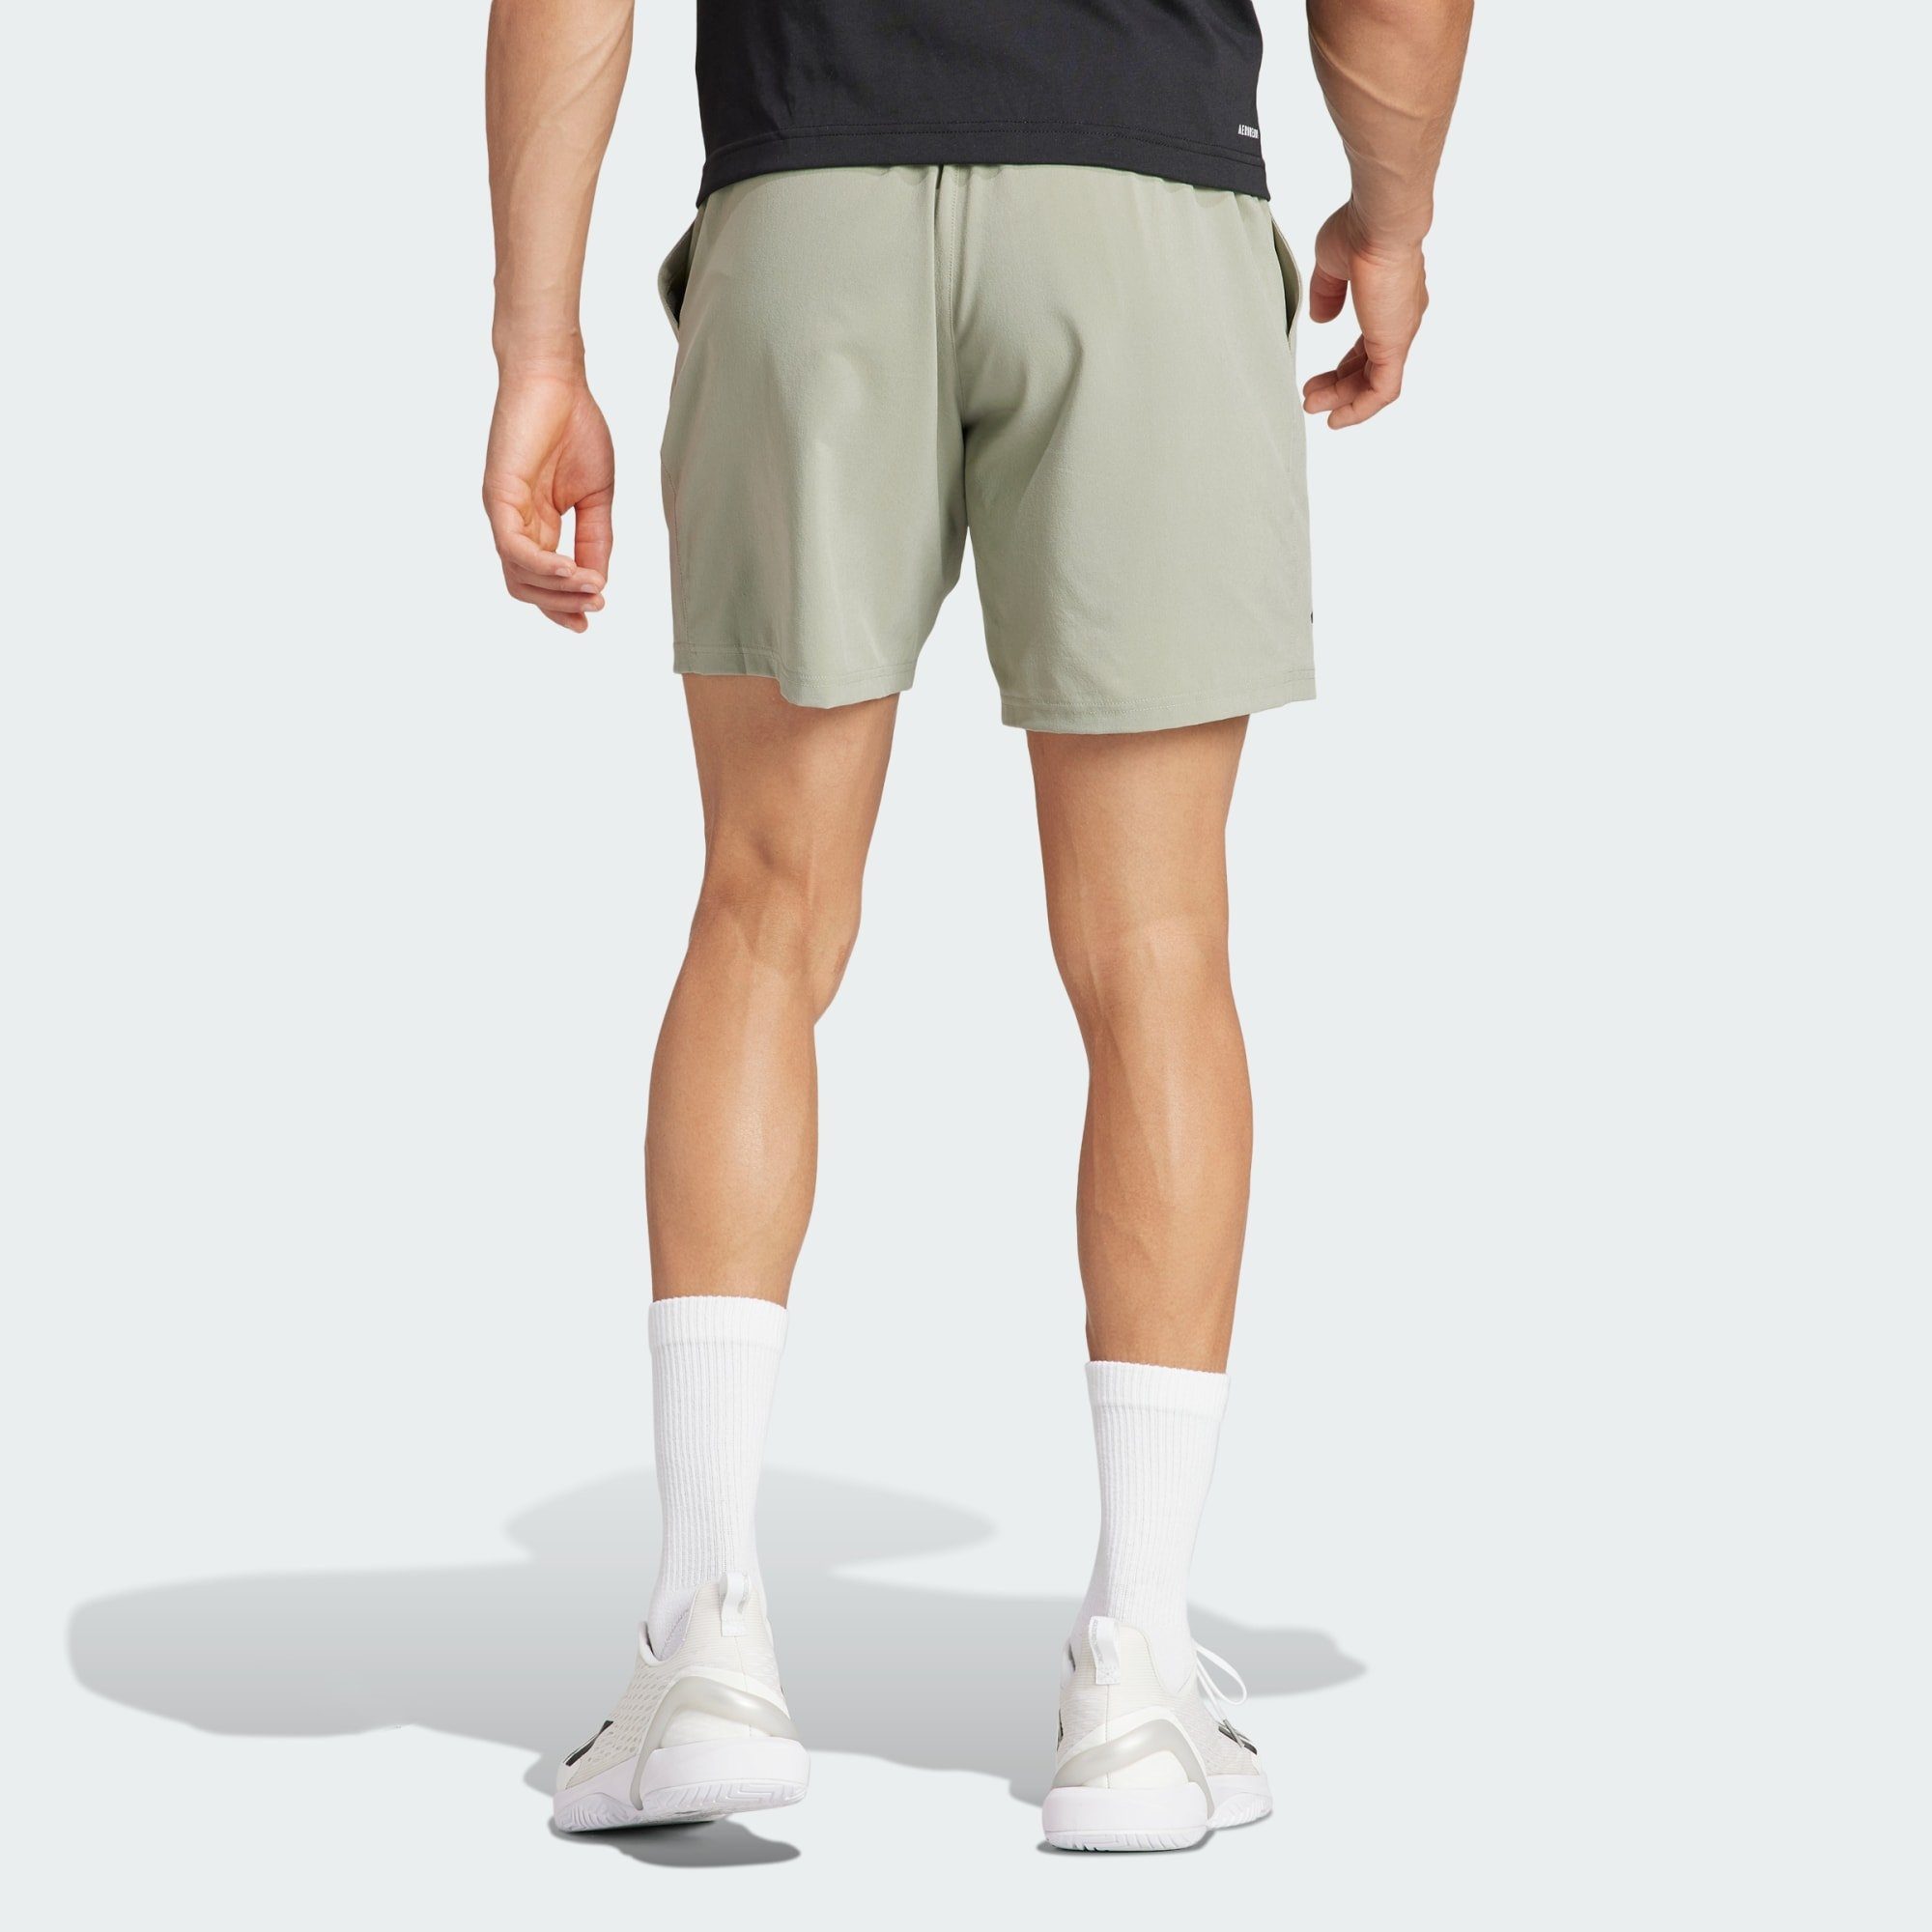 TENNIS STRETCH WOVEN adidas Performance SHORTS Funktionsshorts CLUB Silver Pebble